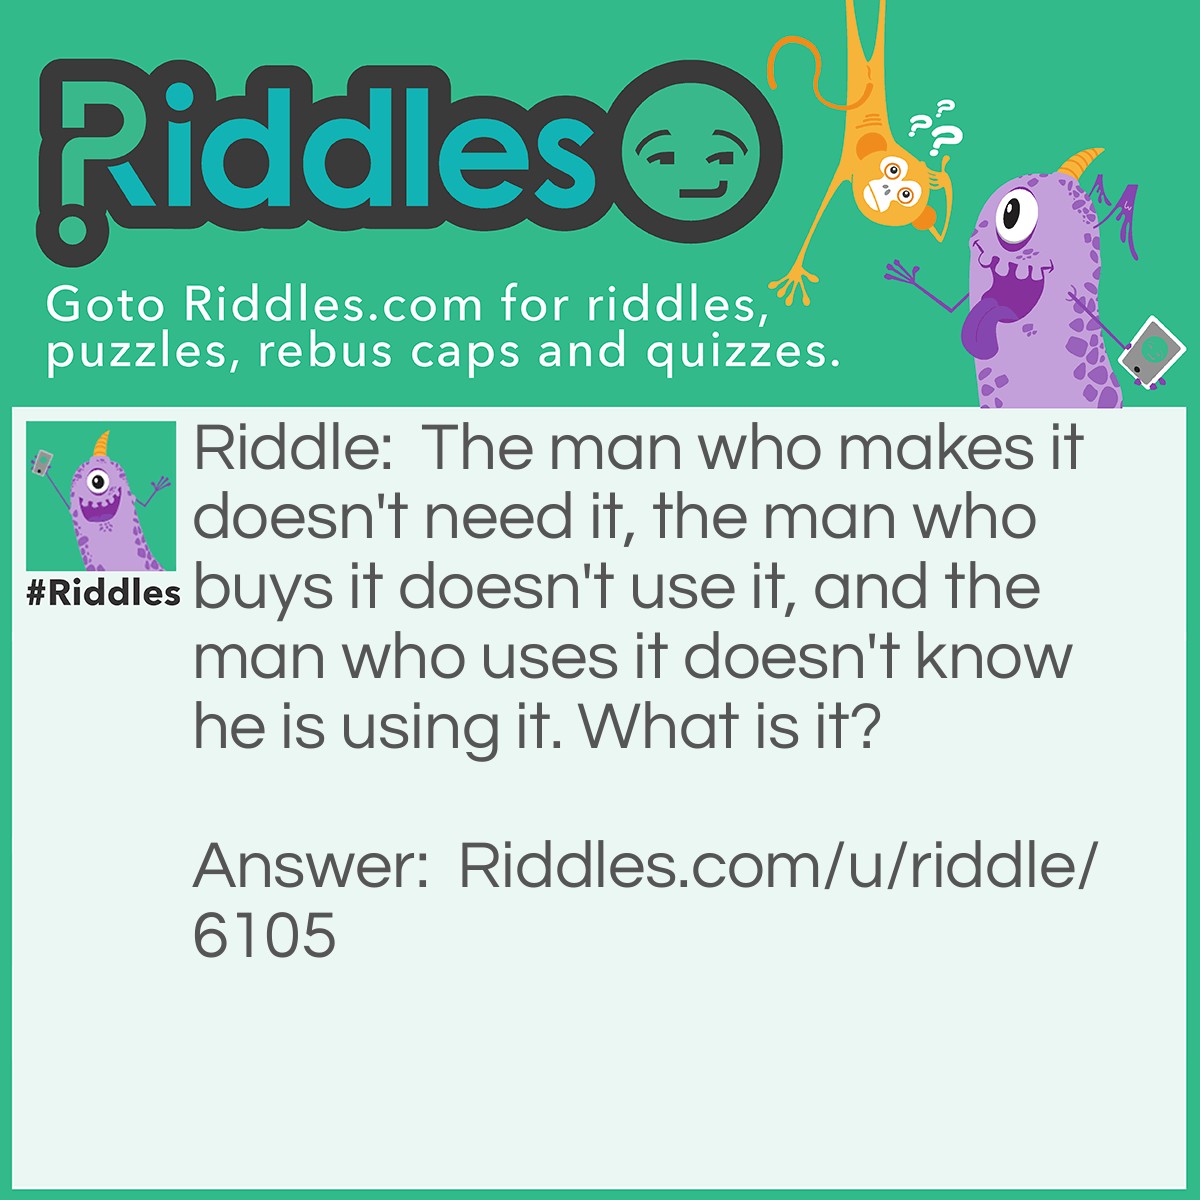 Riddle: The man who makes it doesn't need it, the man who buys it doesn't use it, and the man who uses it doesn't know he is using it. What is it? Answer: a coffin